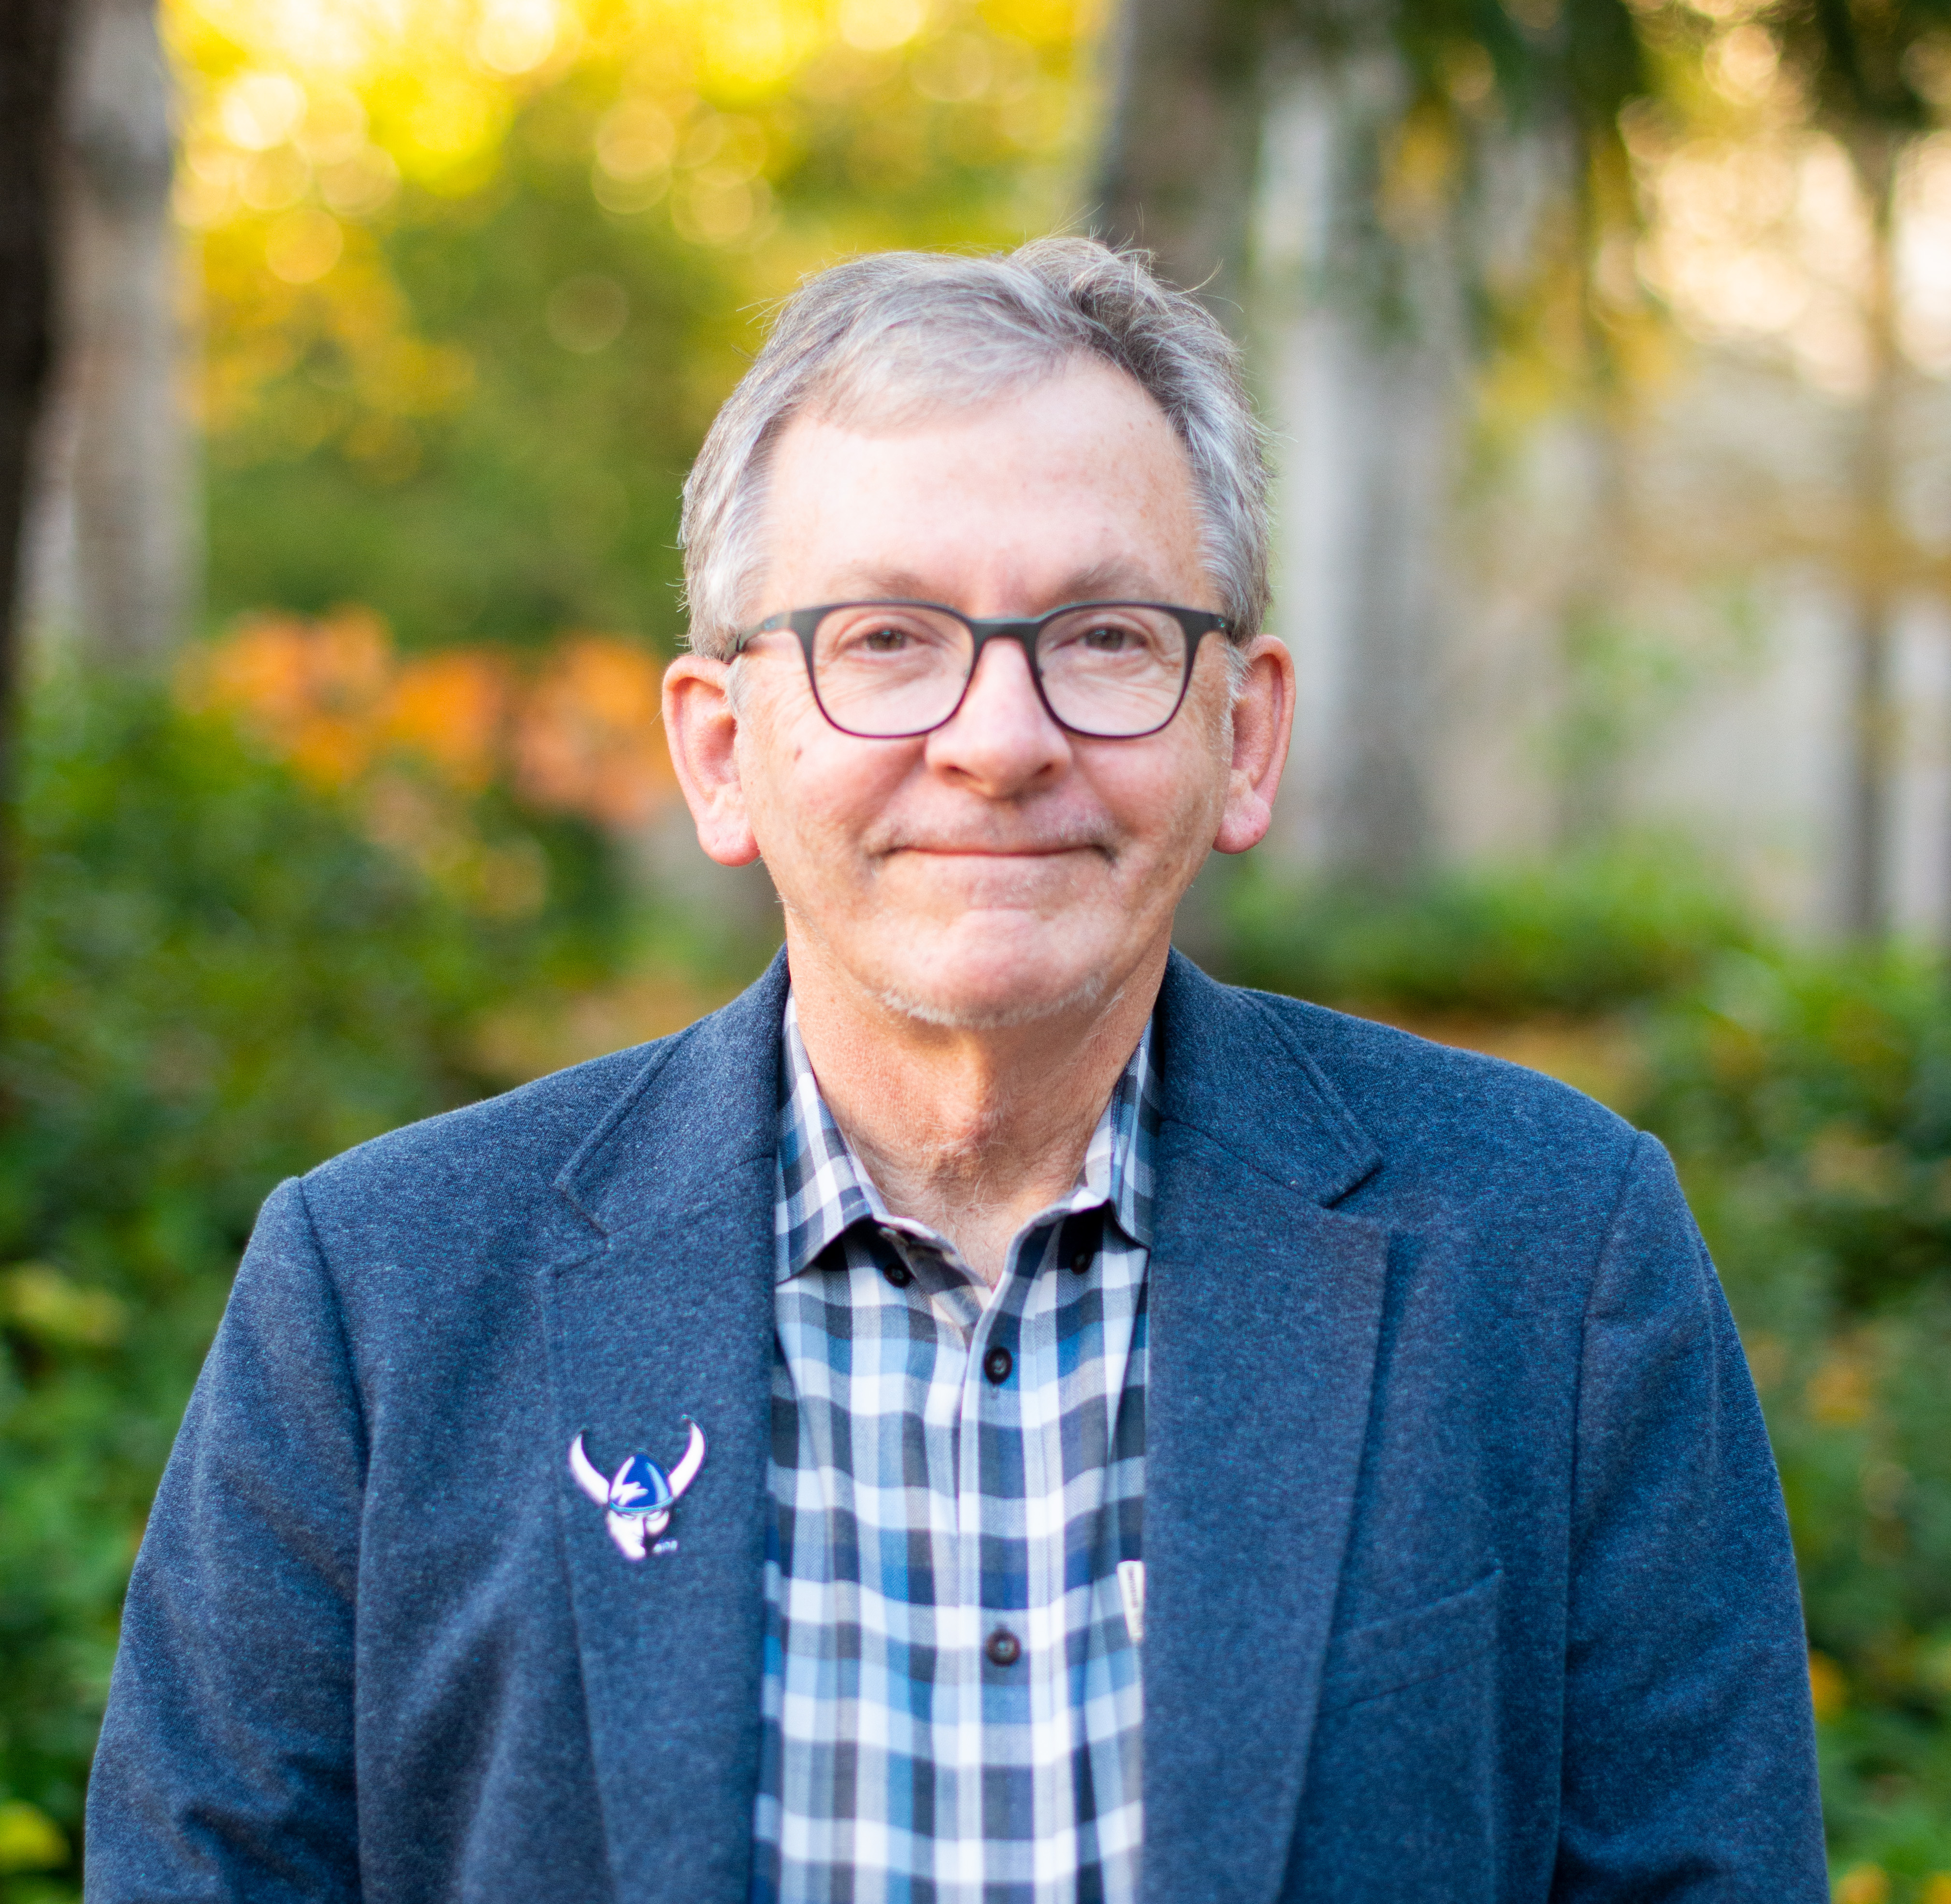 Dean Scott T. young in a blue check skirt and sports coat with a viking pin, standing on an outdoor campus walkway